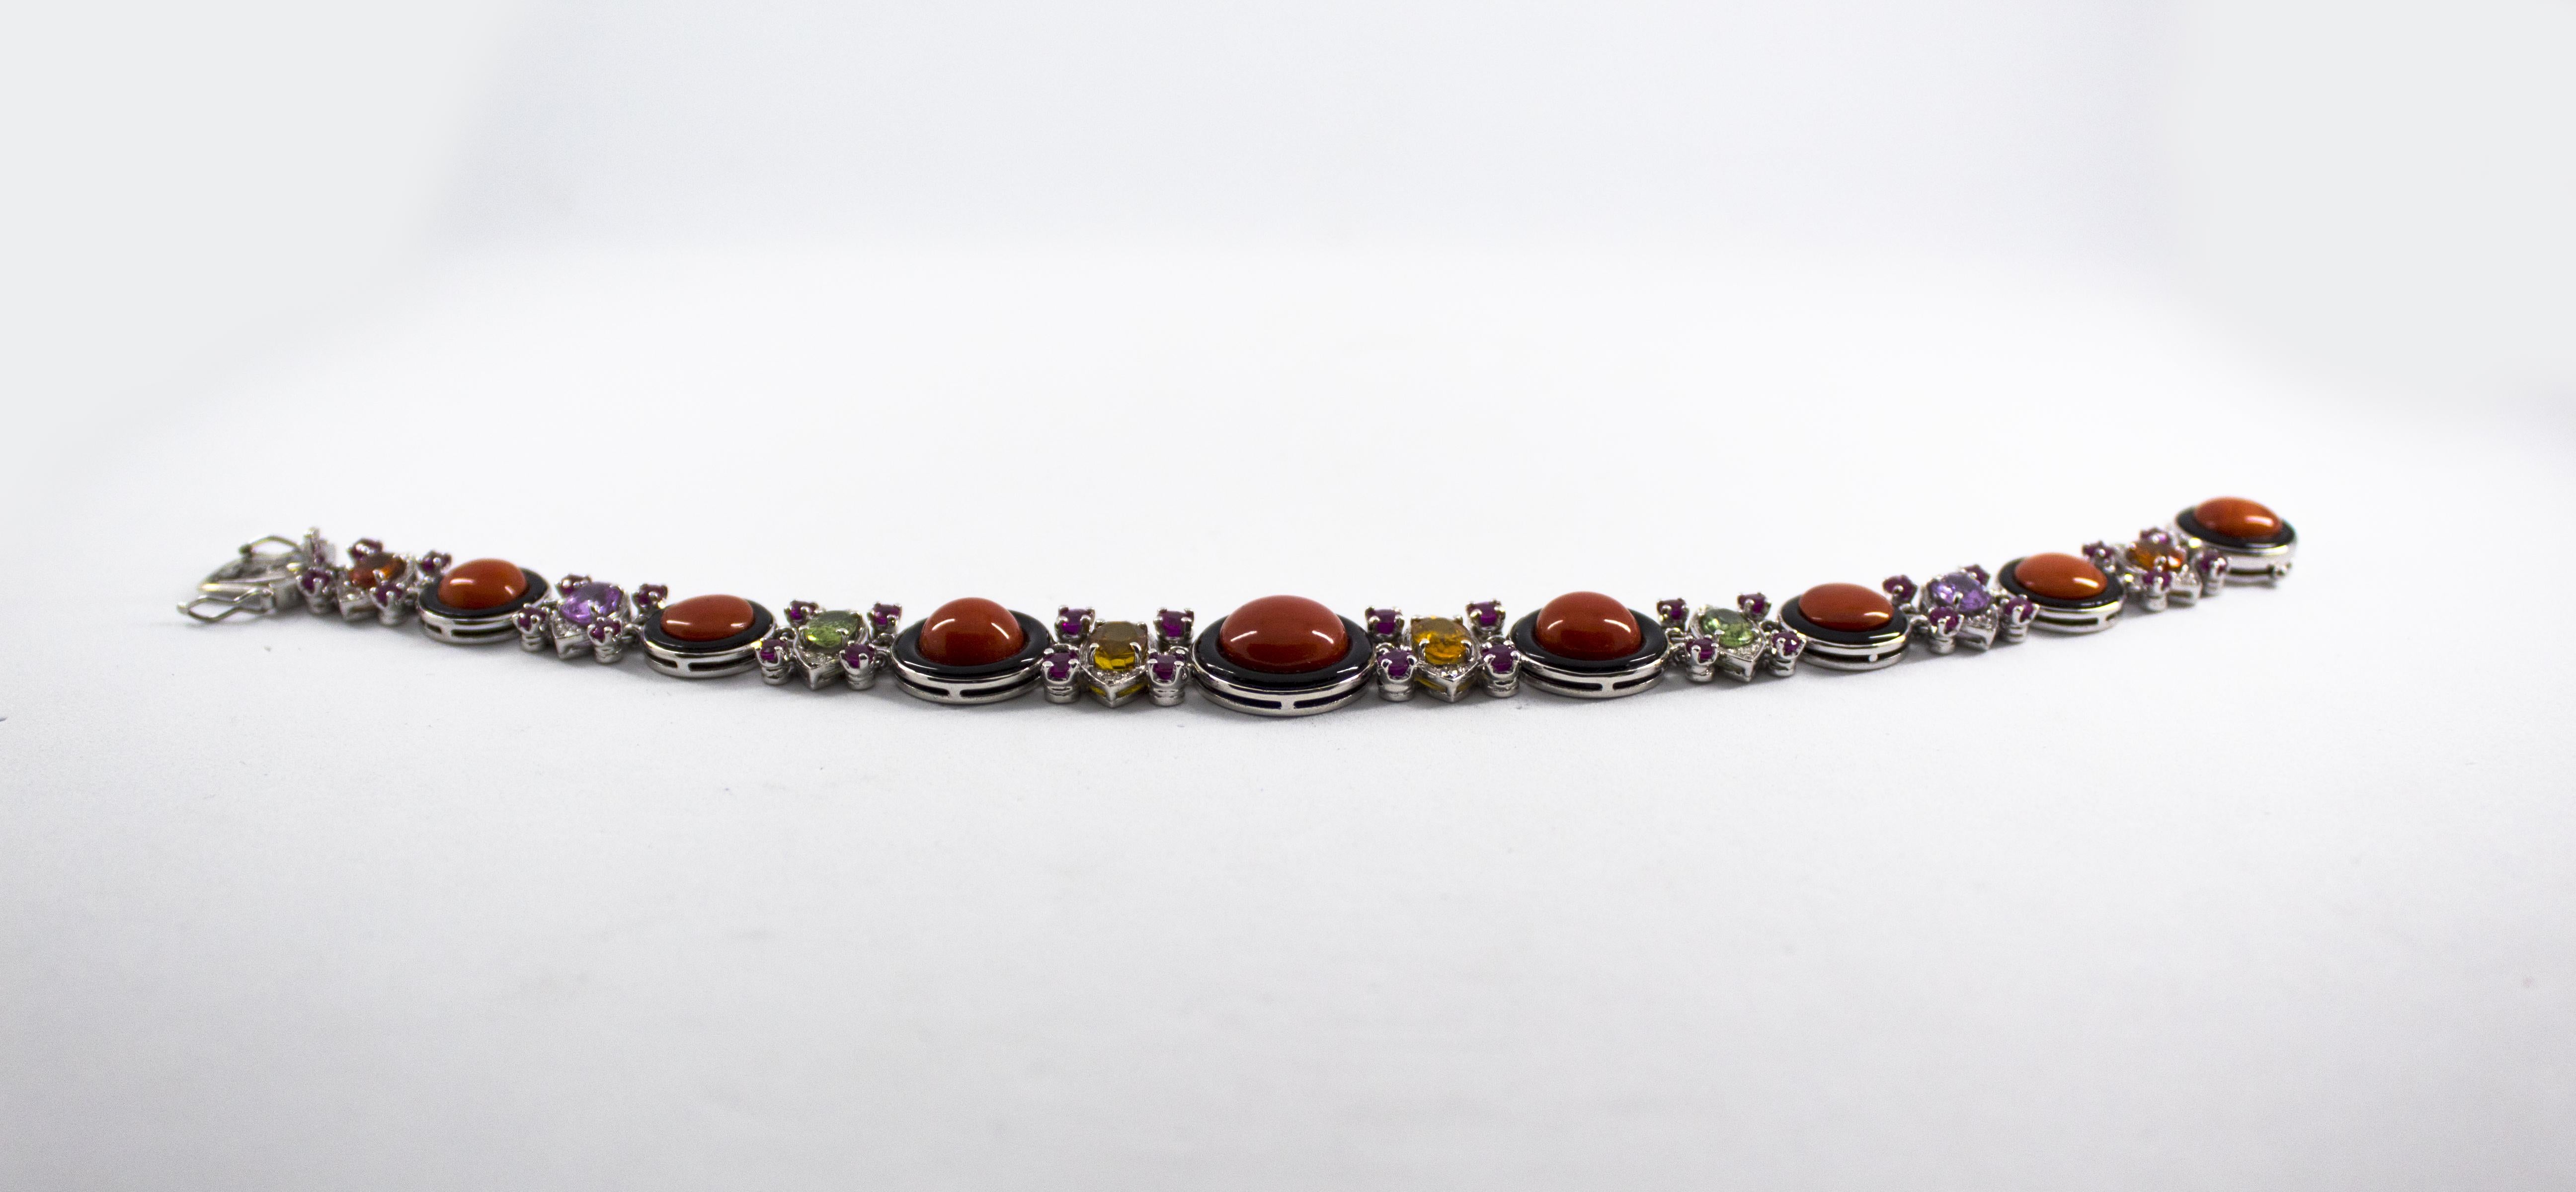 This Bracelet is made of 14K White Gold.
This Bracelet has 0.30 Carats of White Modern Round Cut Diamonds.
This Bracelet has 3.20 Carats of Rubies.
This Bracelet has 6.80 Carats of Colored Sapphires (Green, Pink and Yellow).
This Bracelet has also